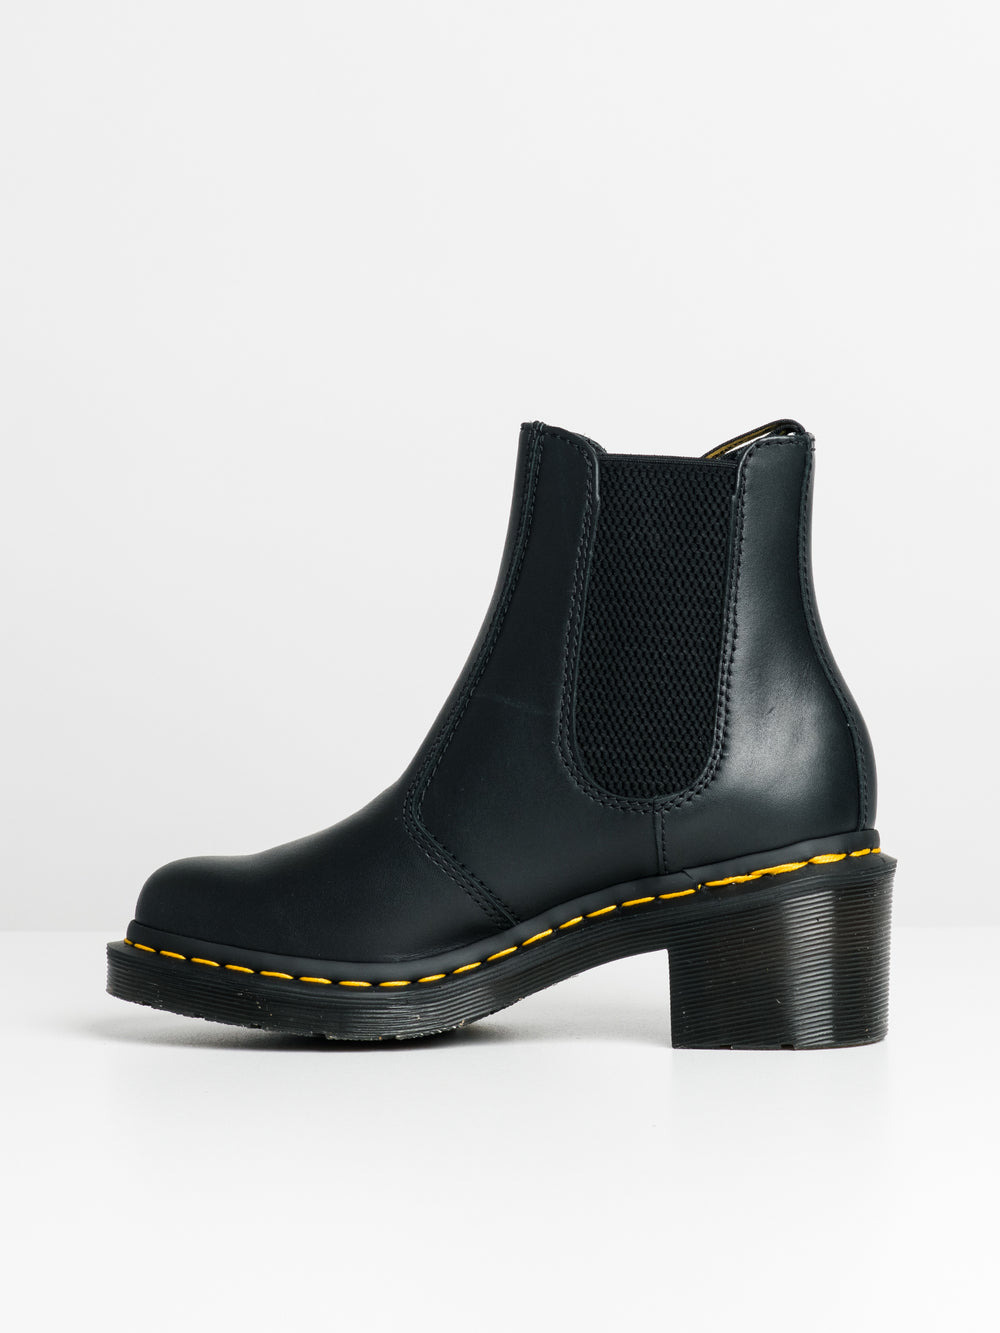 WOMENS DR MARTENS CADENCE BOOT - CLEARANCE